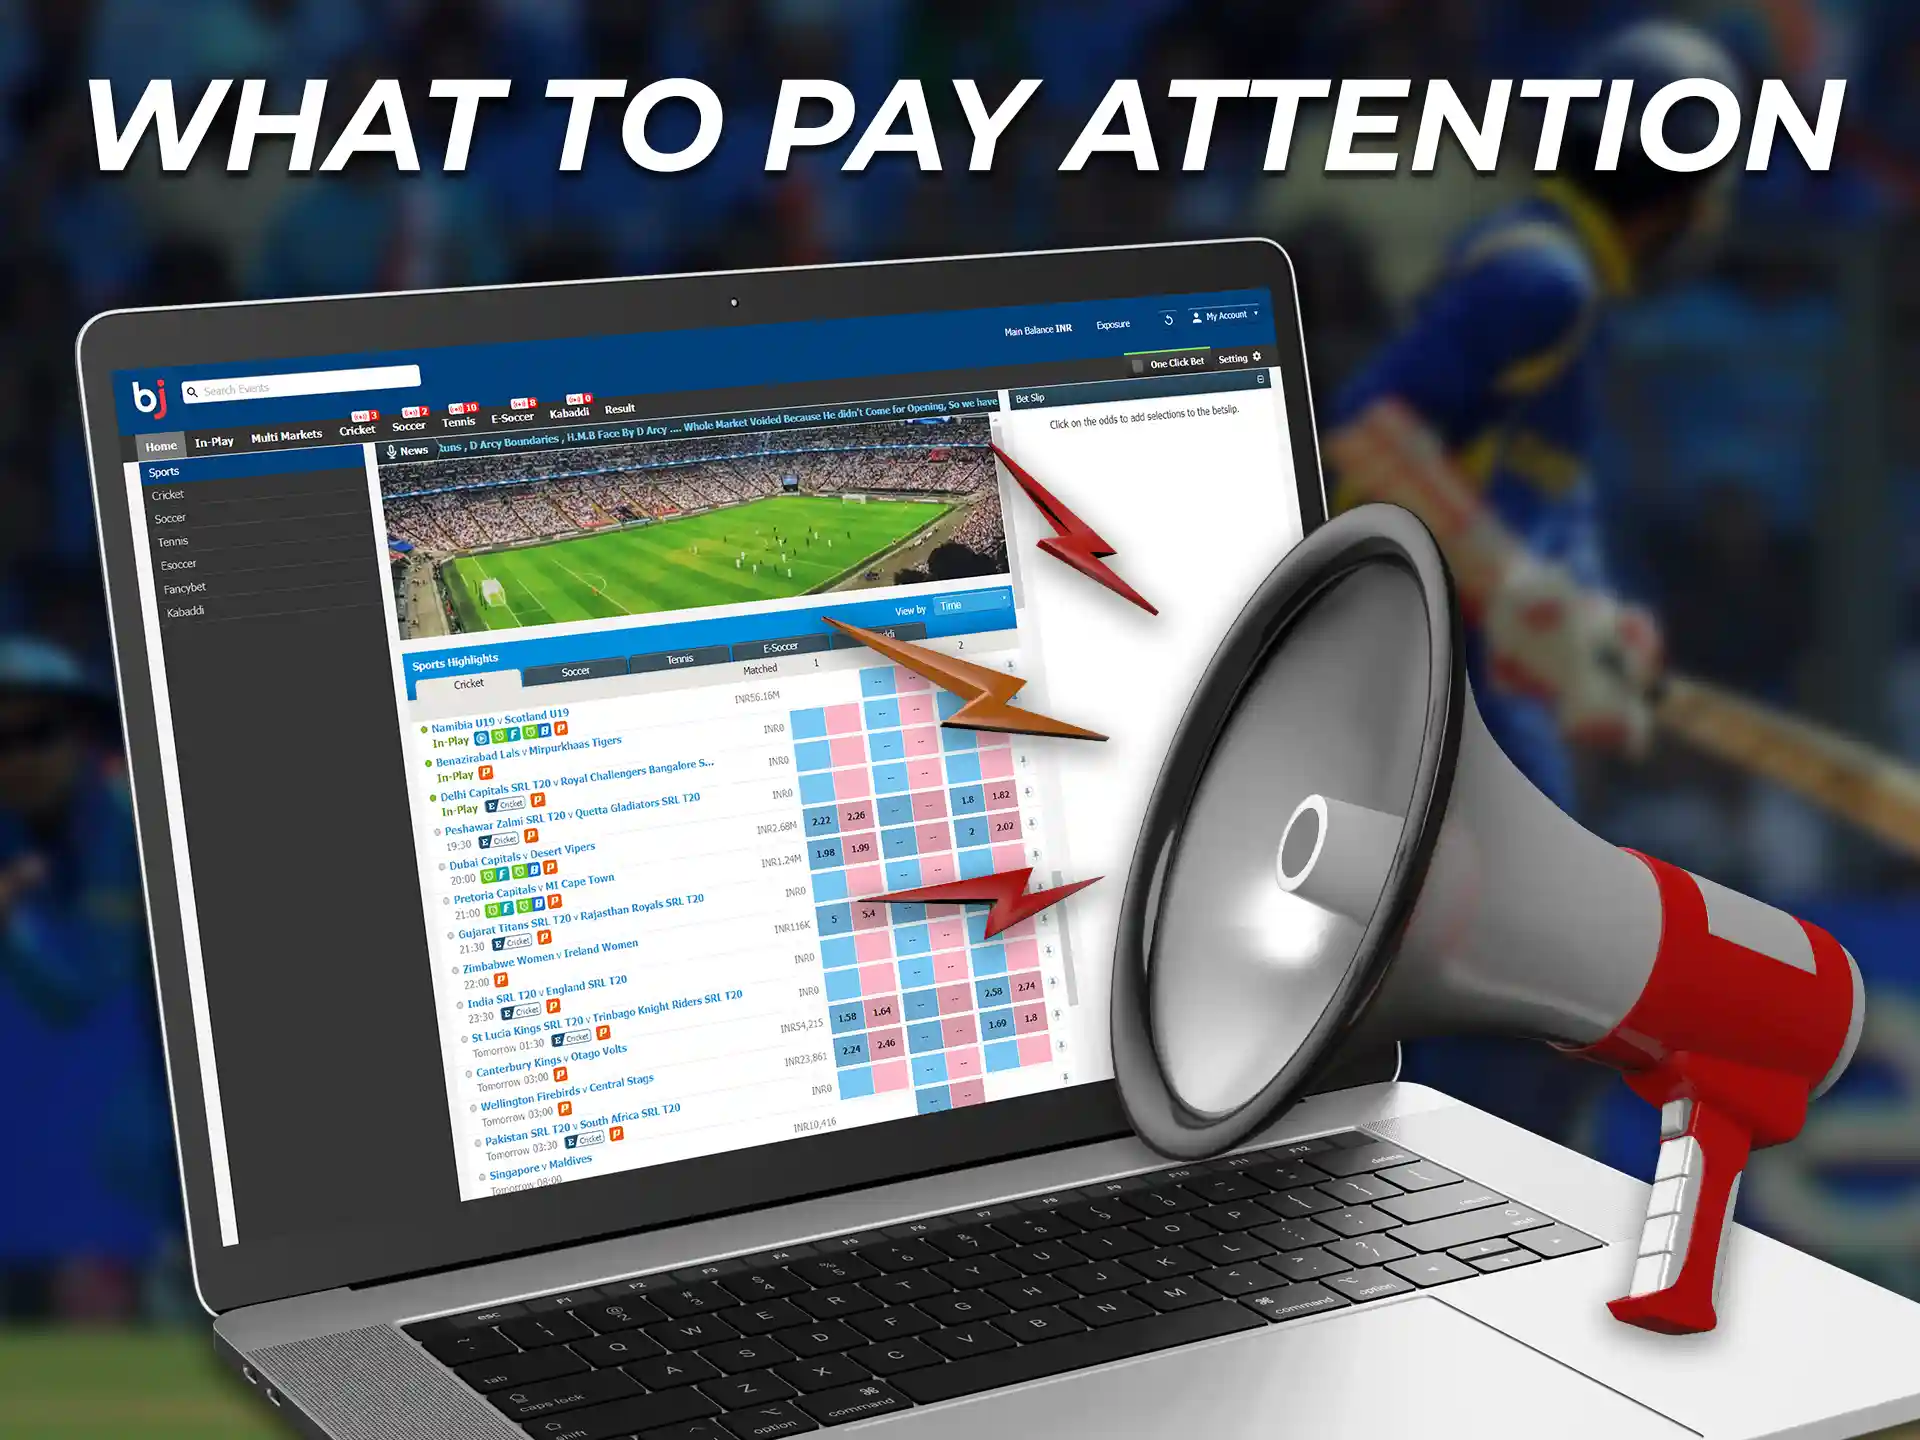 Be vigilant and evaluate new betting sites against the criterions on the list.